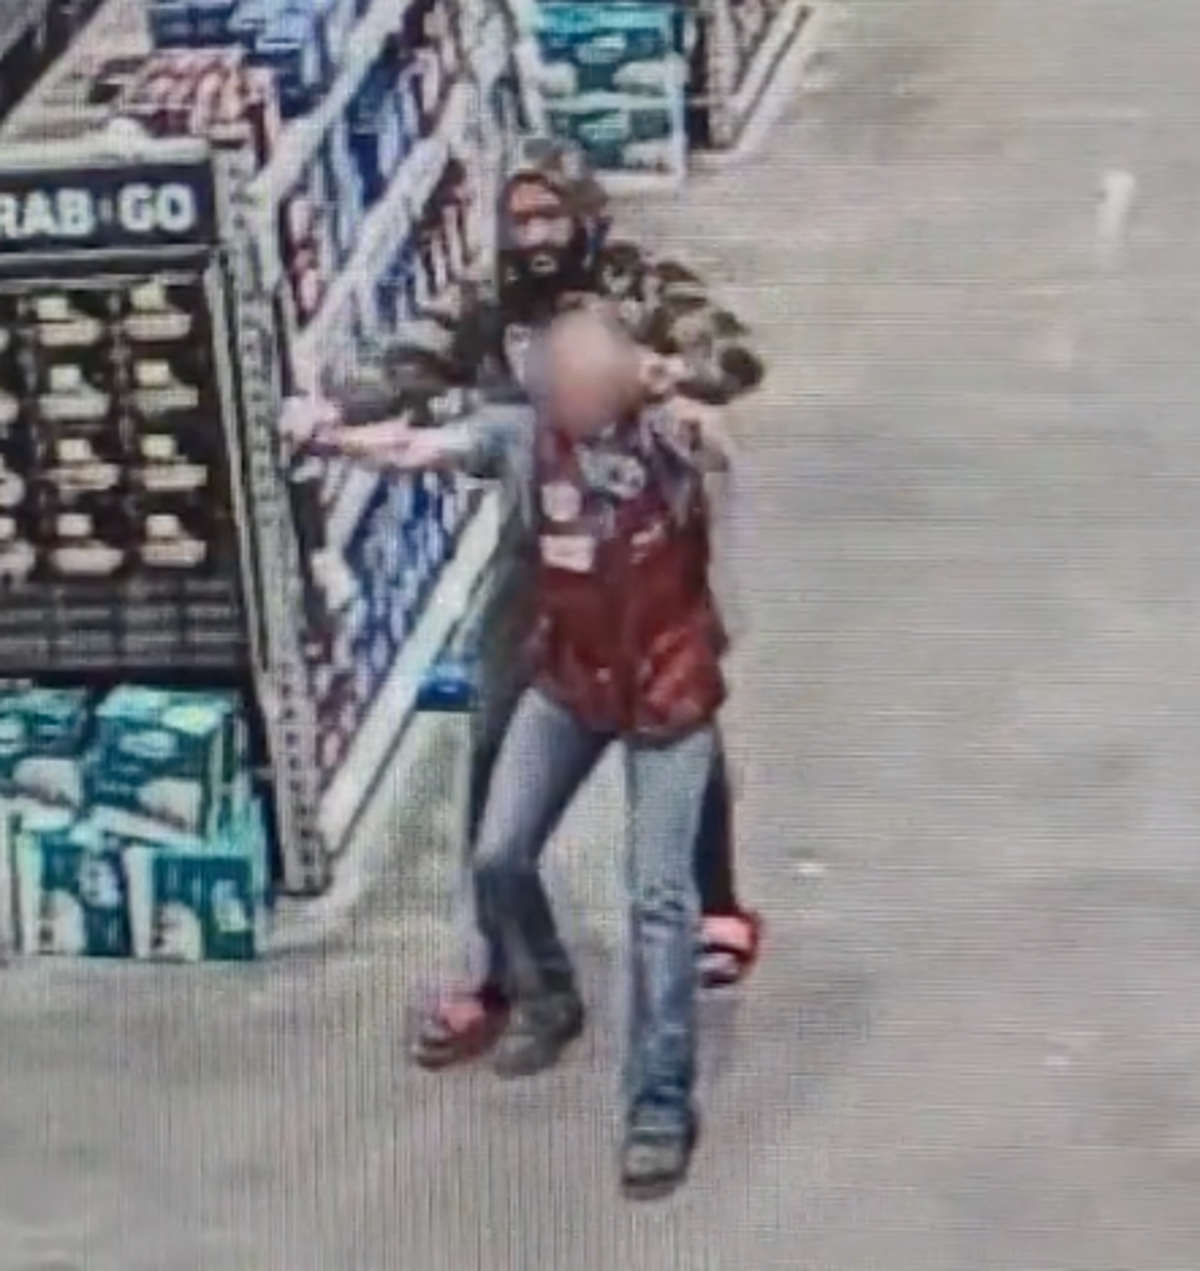 Chilling video emerges of suspect trying to abduct Lowe’s worker mid-shift 